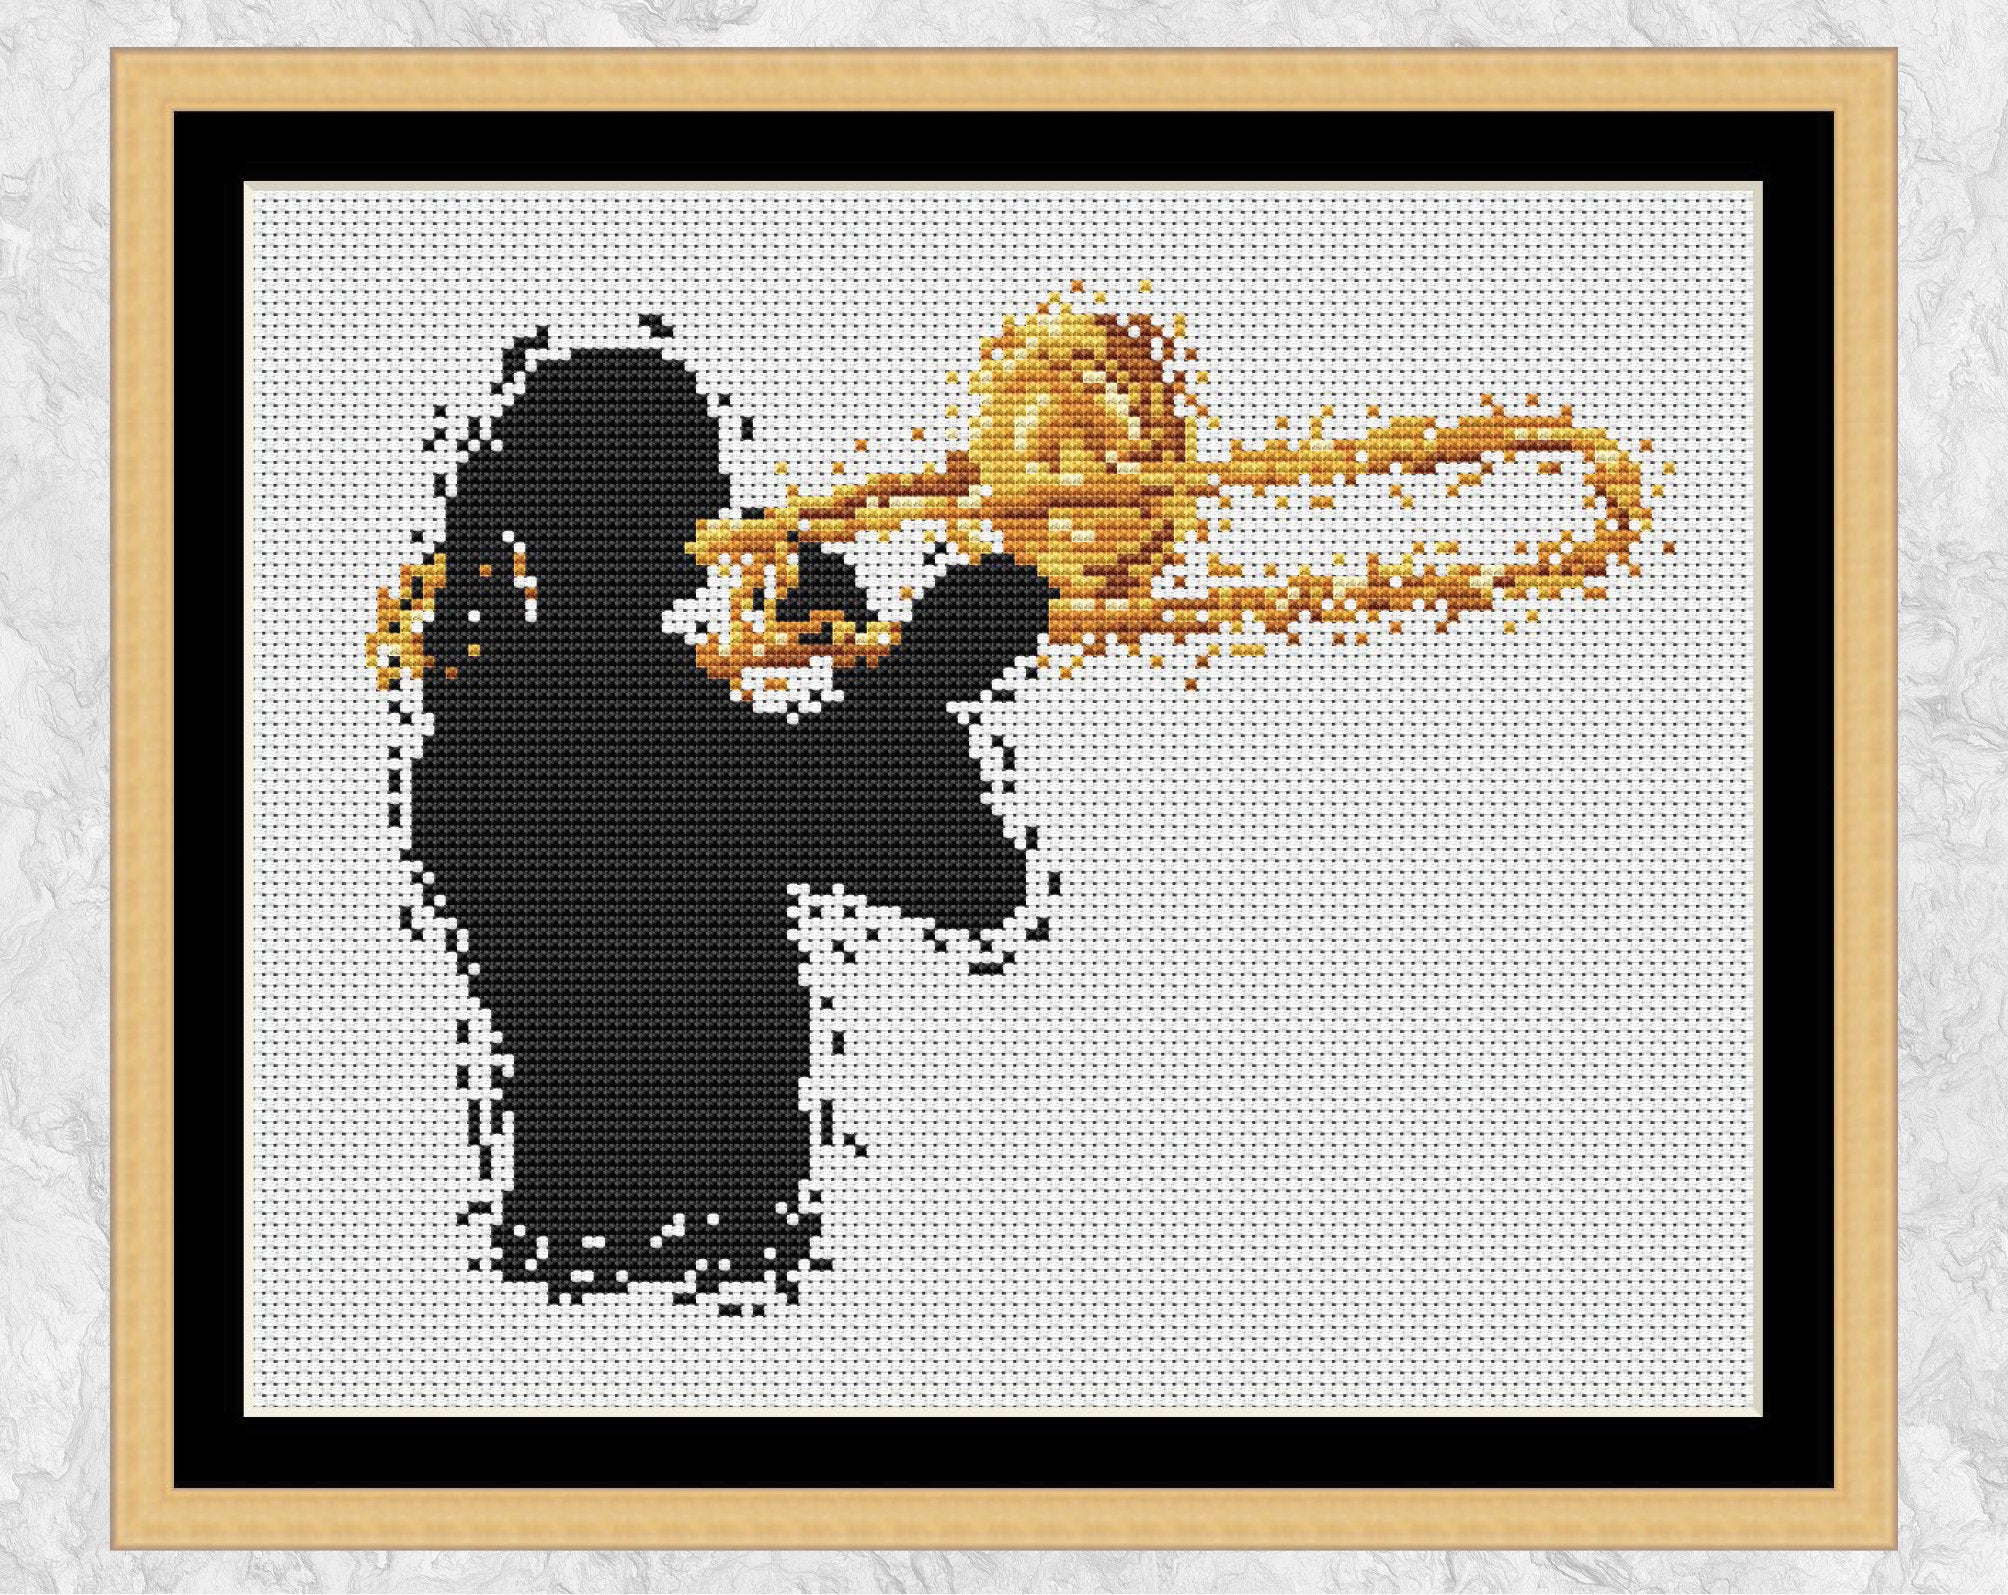 Modern art cross stitch pattern of a female trombonist. Shown with frame.